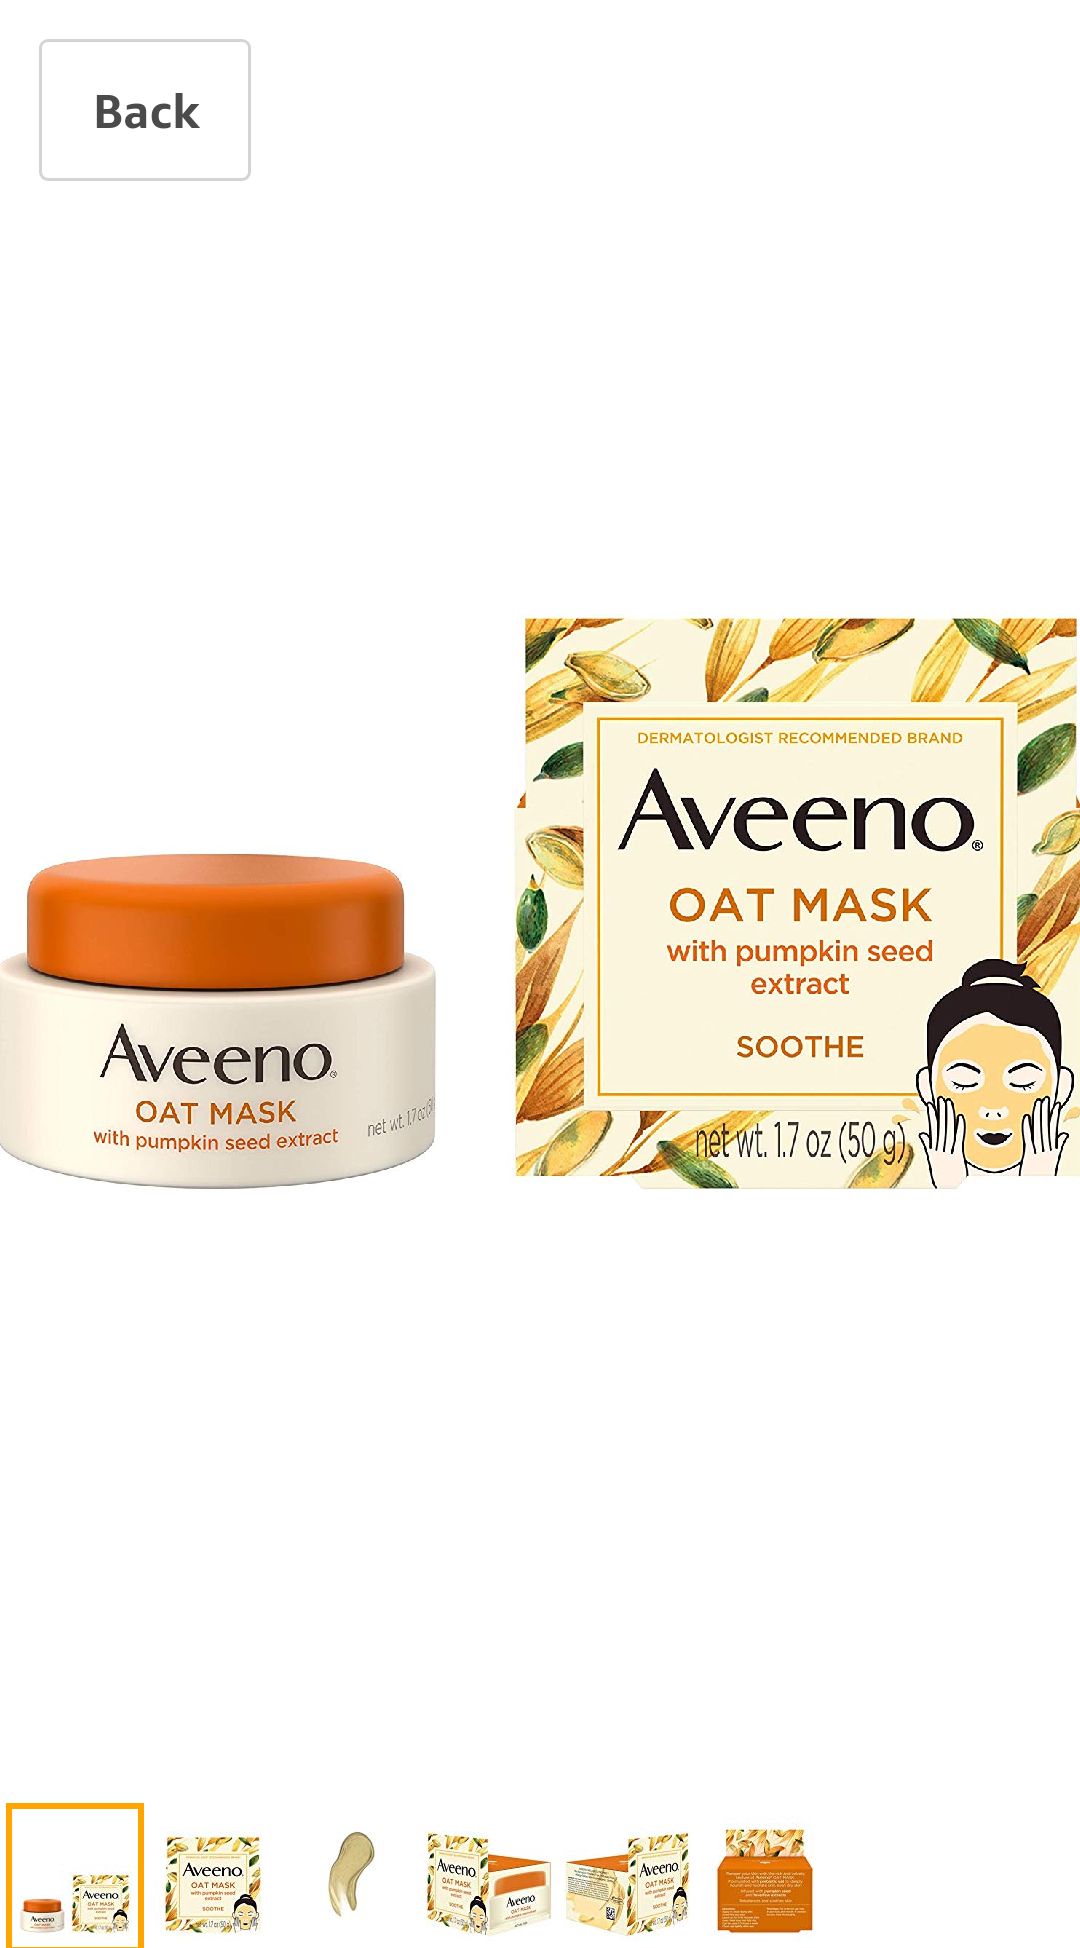 Amazon.com: Aveeno Oat Face Mask with Soothing Pumpkin Seed Extract and Feverfew Extract, to Rebalance and Hydrate Skin, Paraben Free, Phthalate-Free, 1.7 oz: Beauty面膜